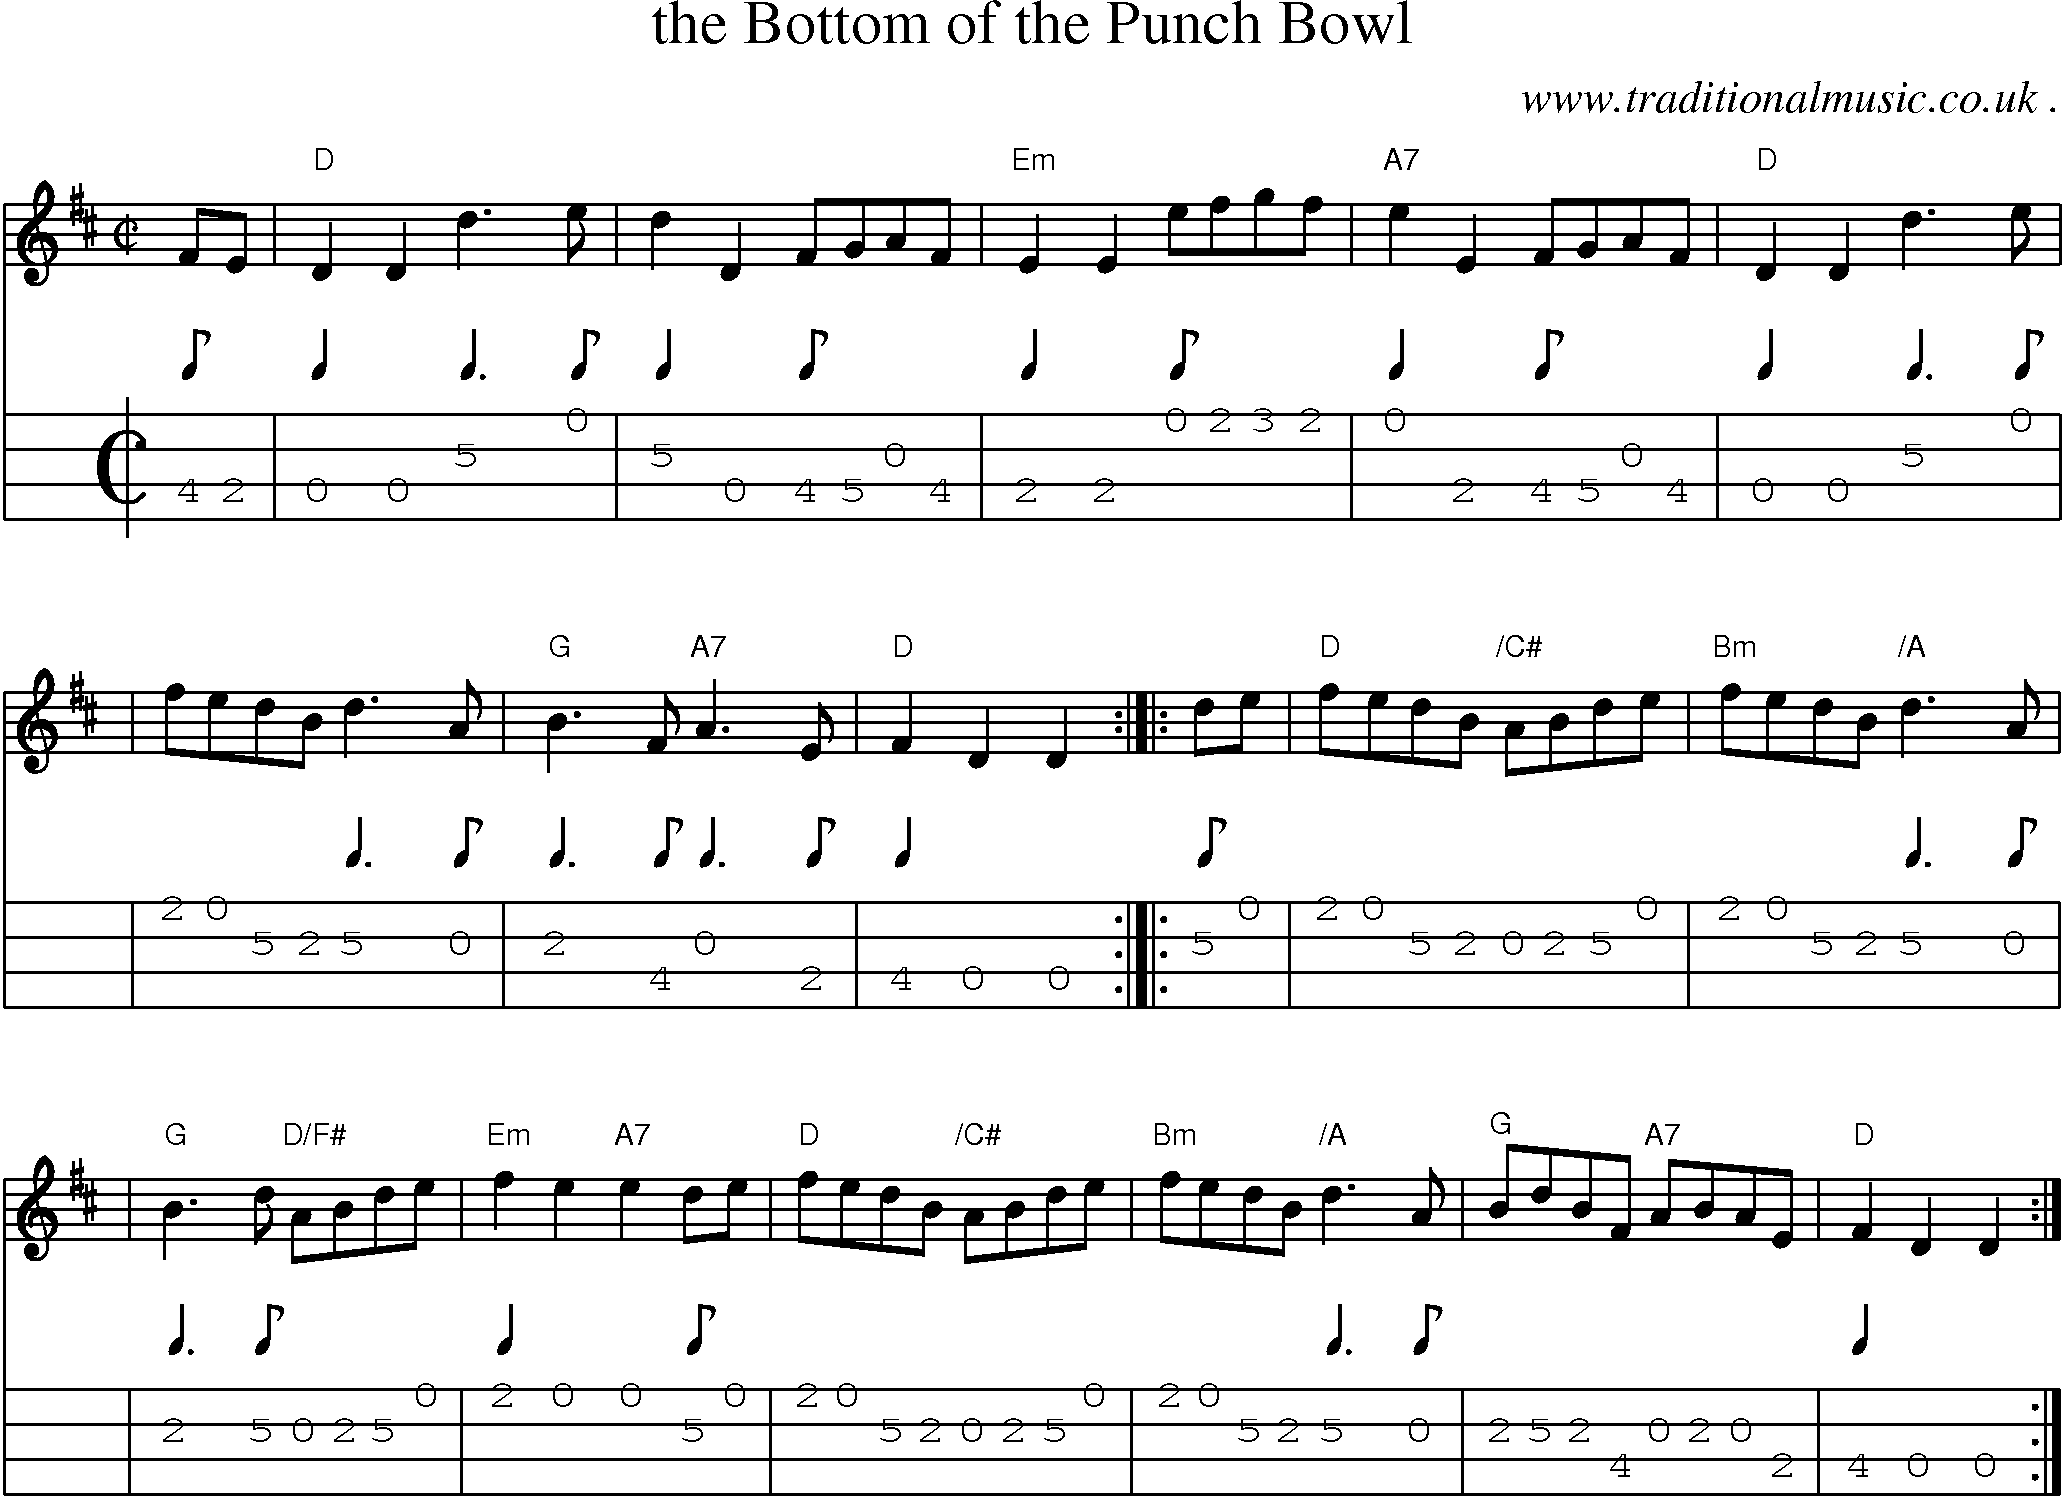 Sheet-music  score, Chords and Mandolin Tabs for The Bottom Of The Punch Bowl